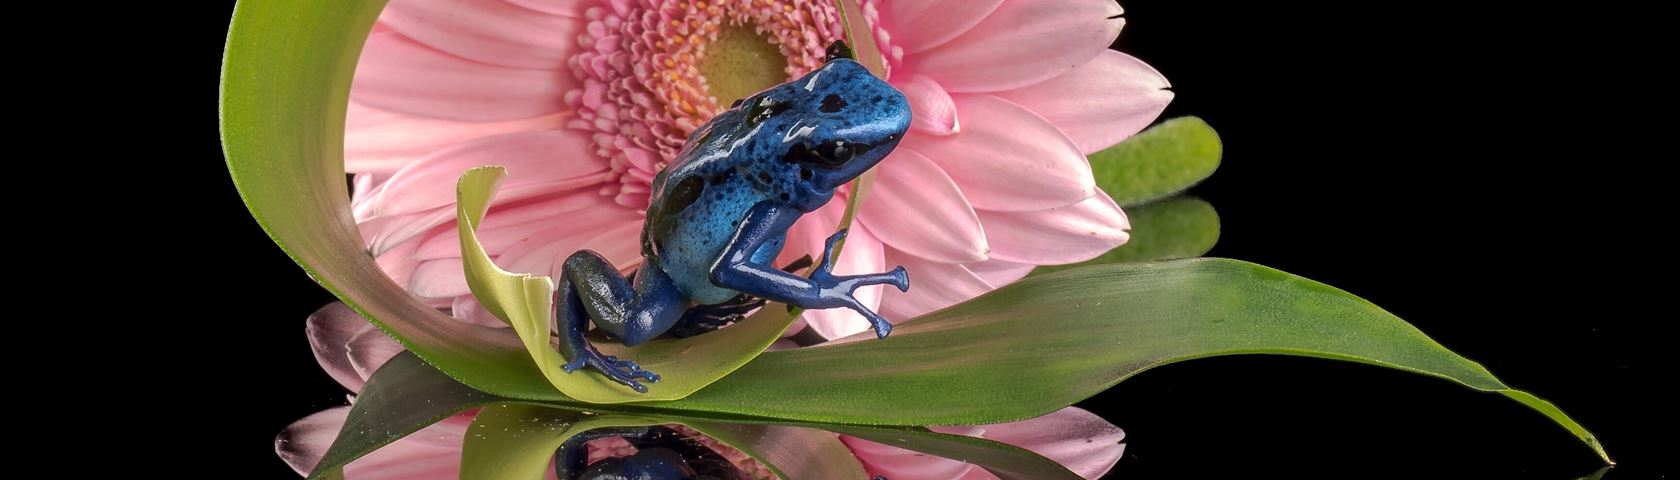 the Froggy and the Flower